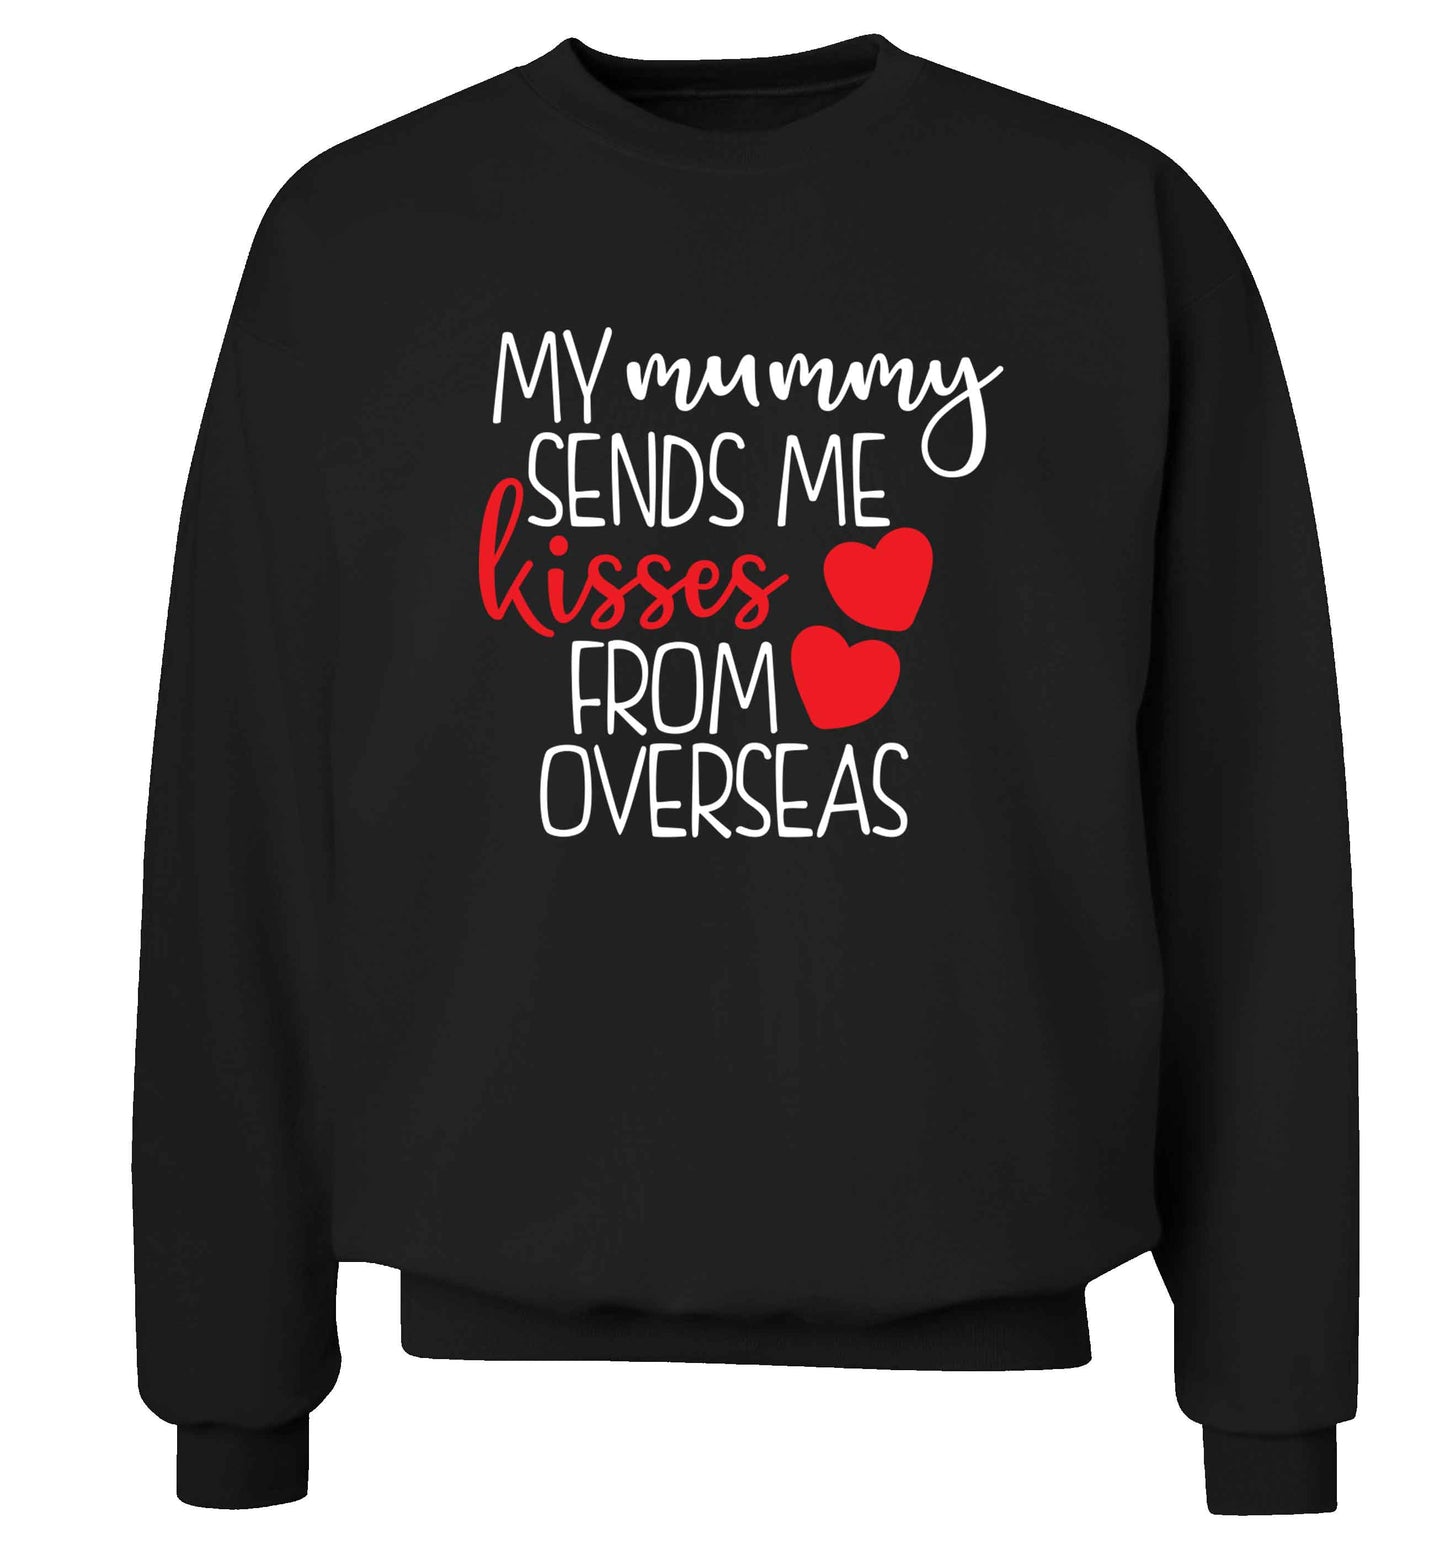 My mummy sends me kisses from overseas adult's unisex black sweater 2XL